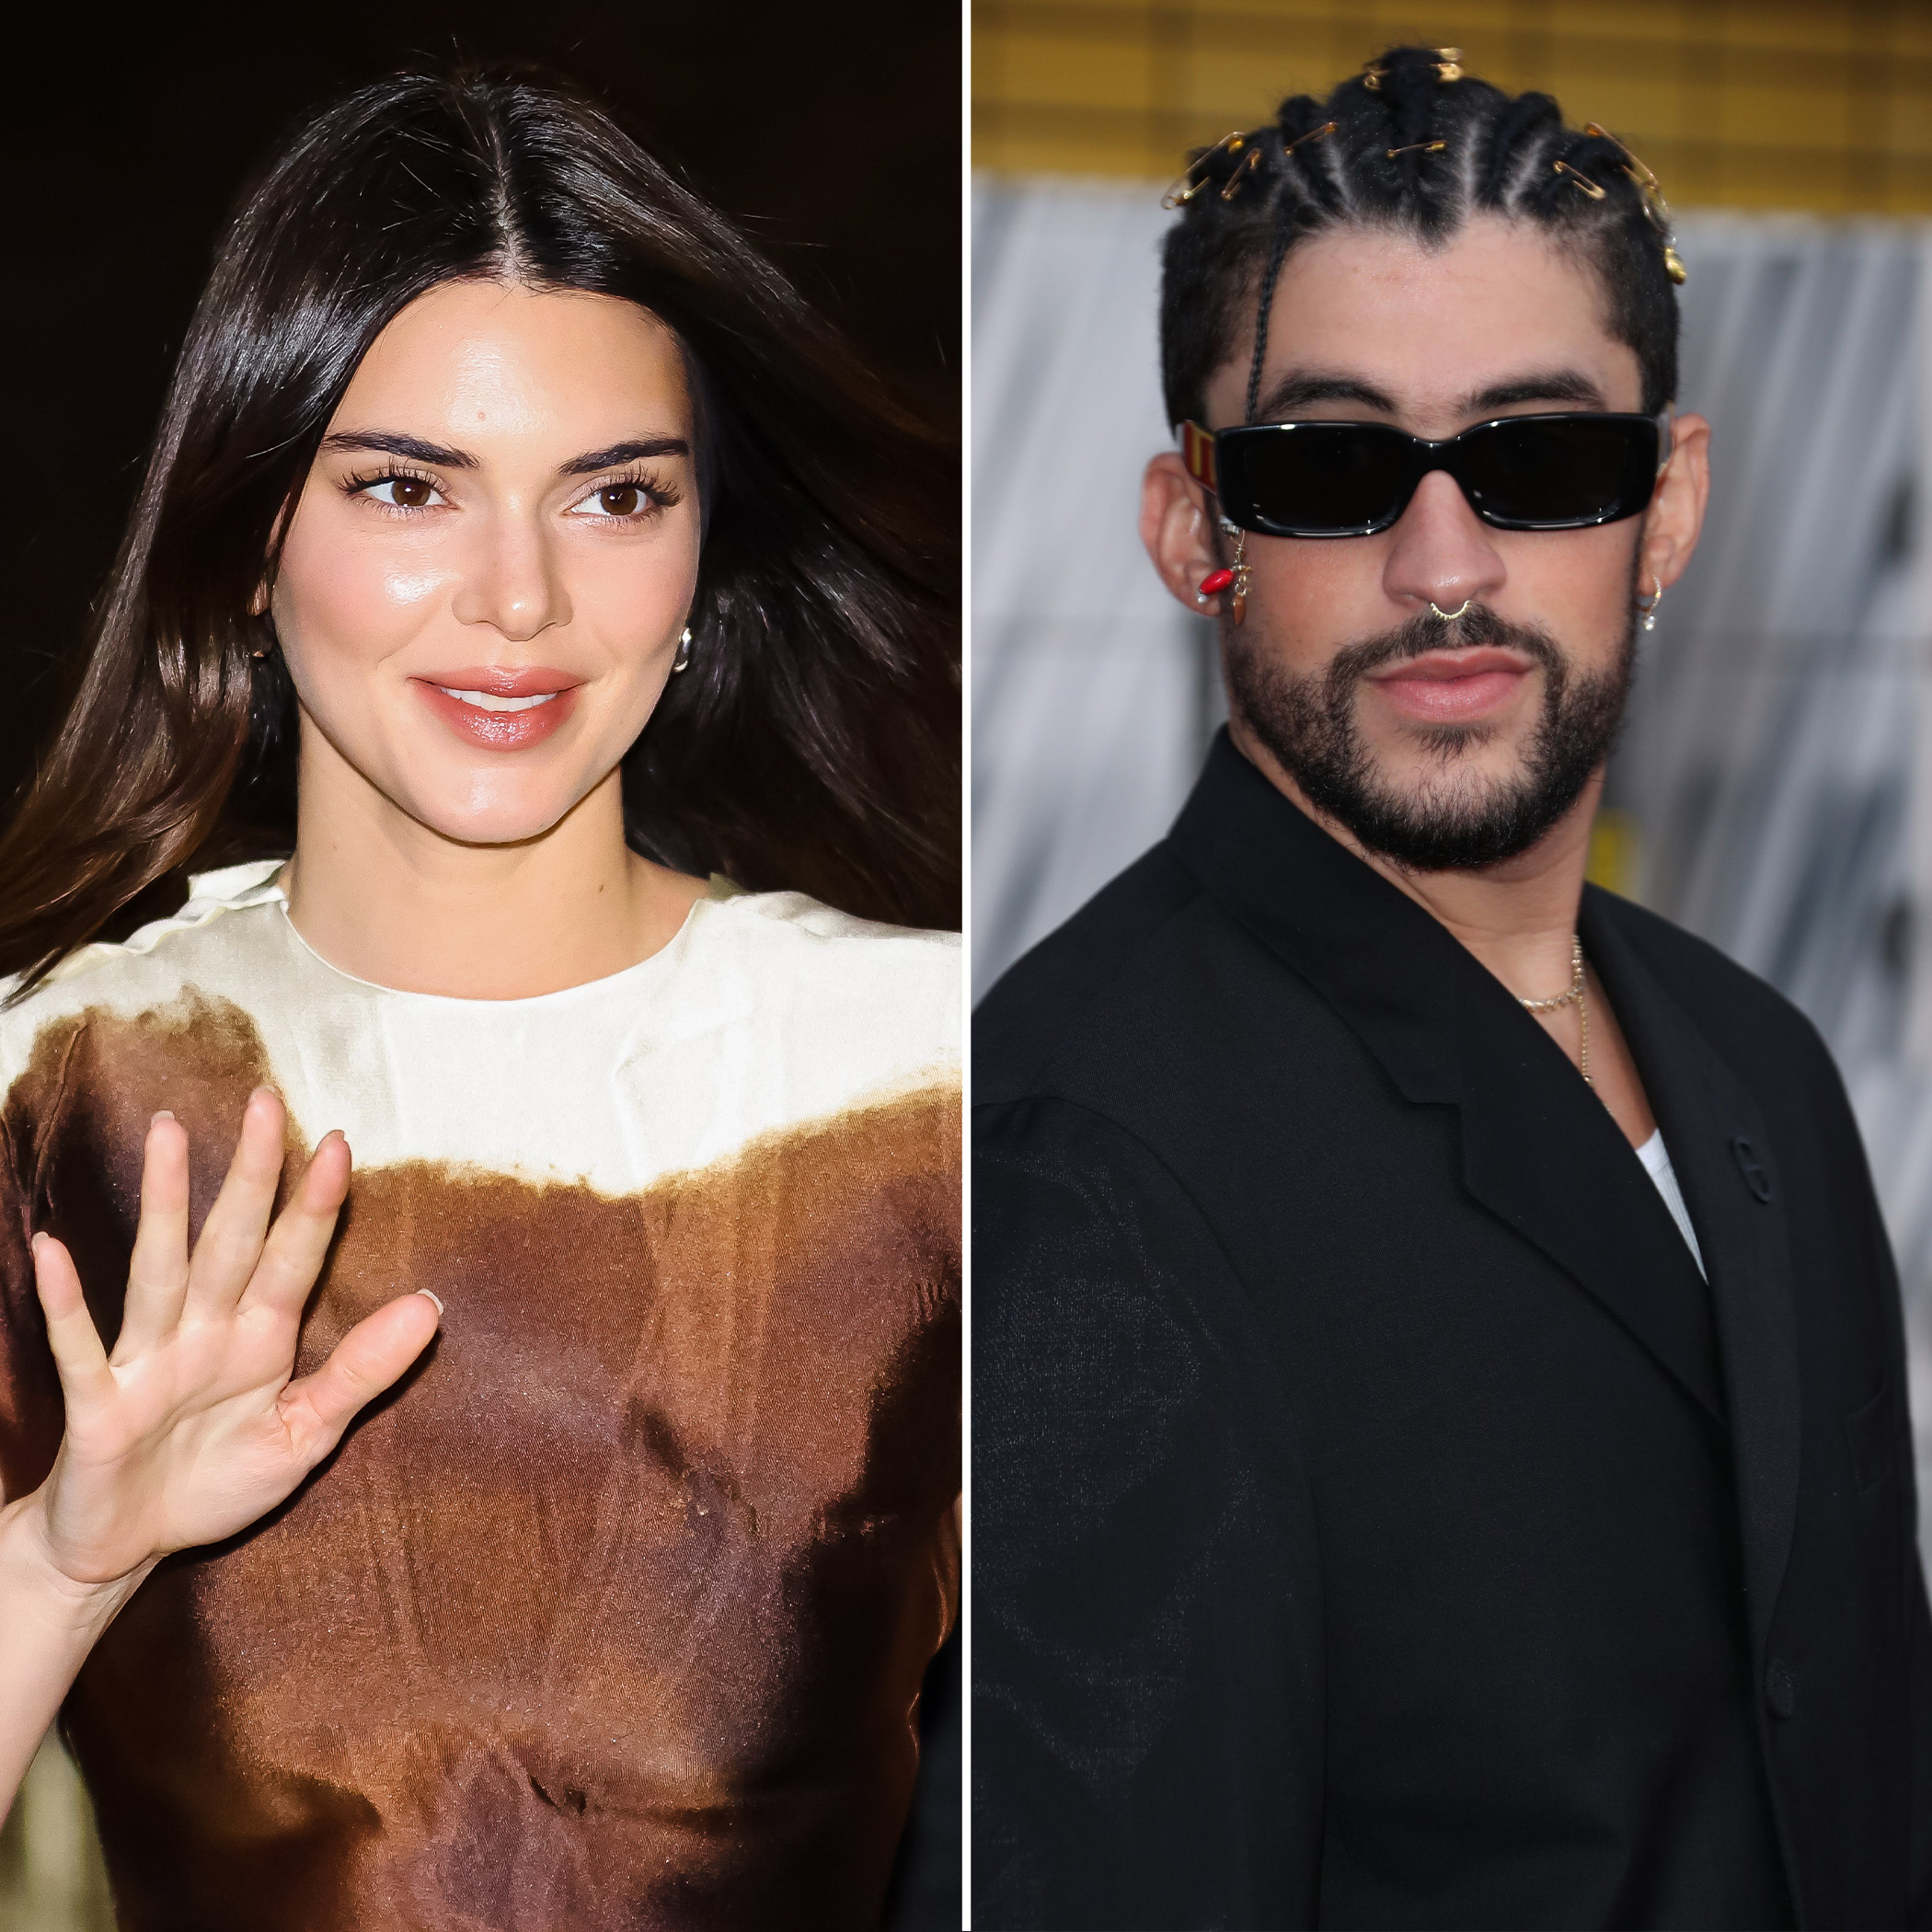 Kendall Jenner and Bad Bunny Share Some PDA in Gucci's New Campaign